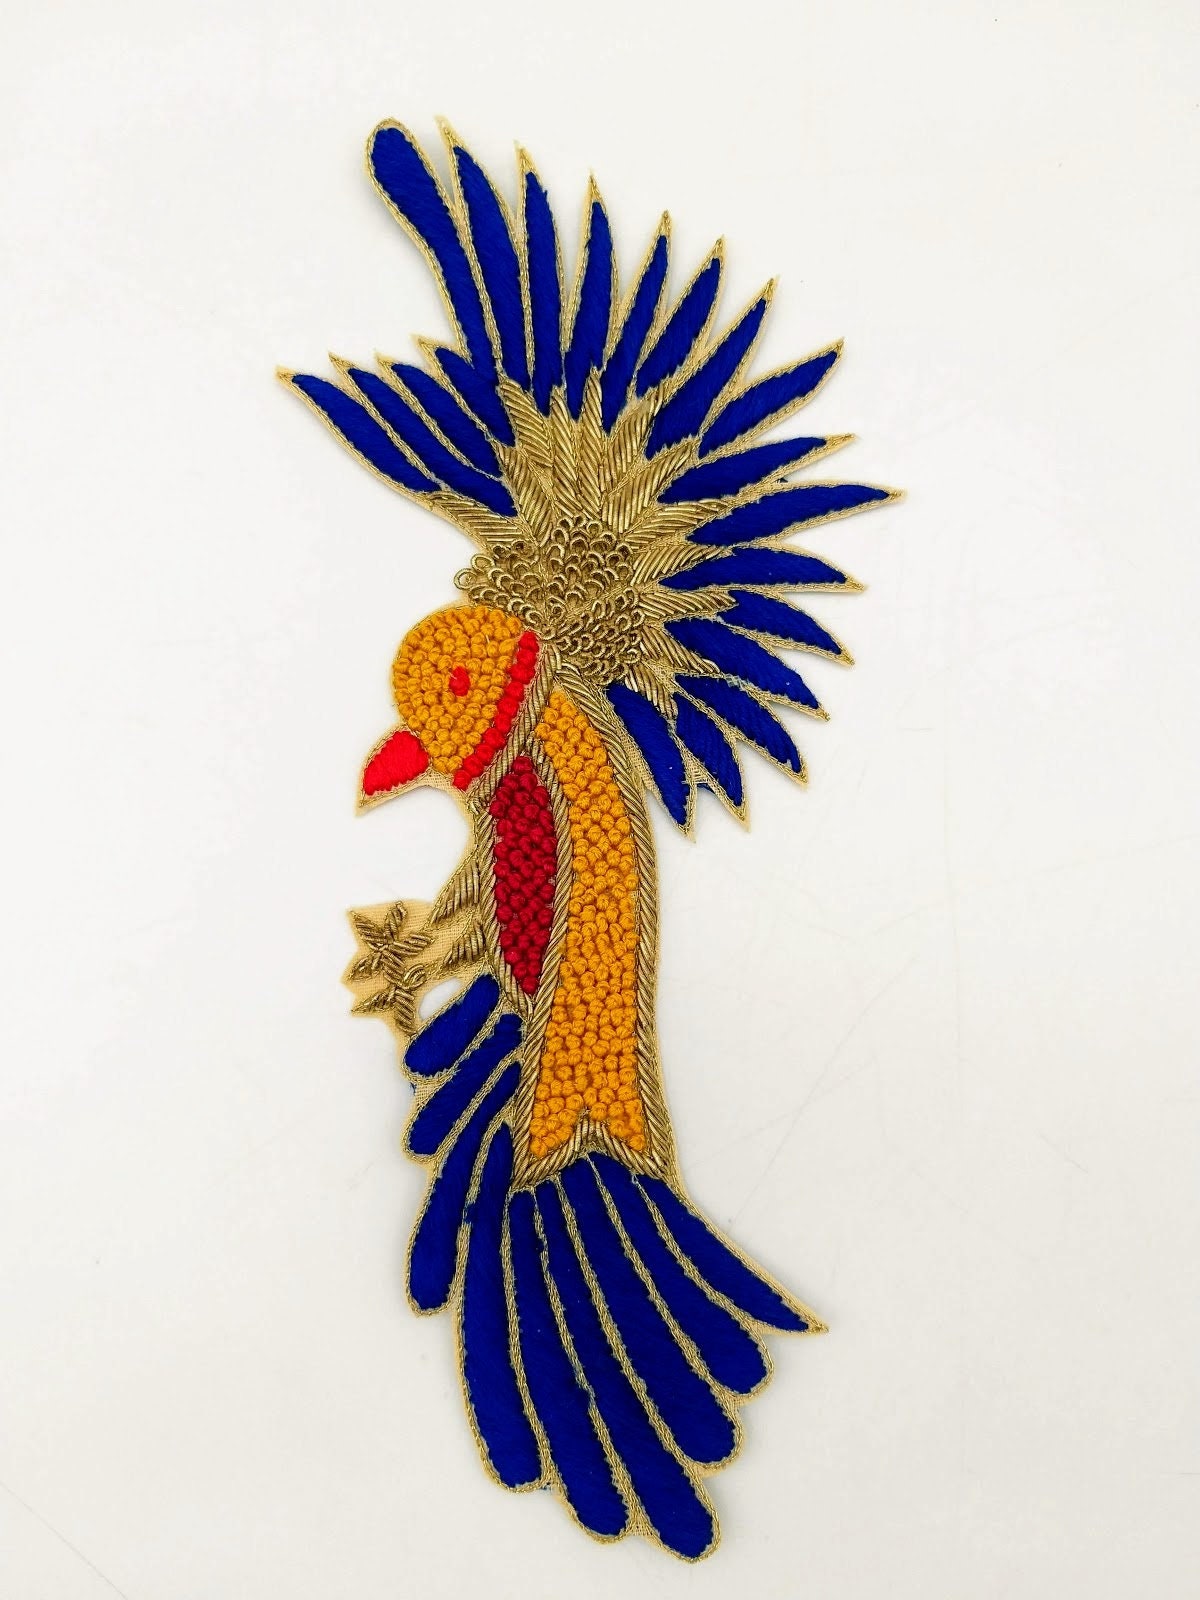 Hand Embroidered Bird Applique With Yellow, Blue and Red Embroidery With Antique Gold Zardozi Work, Bird Applique